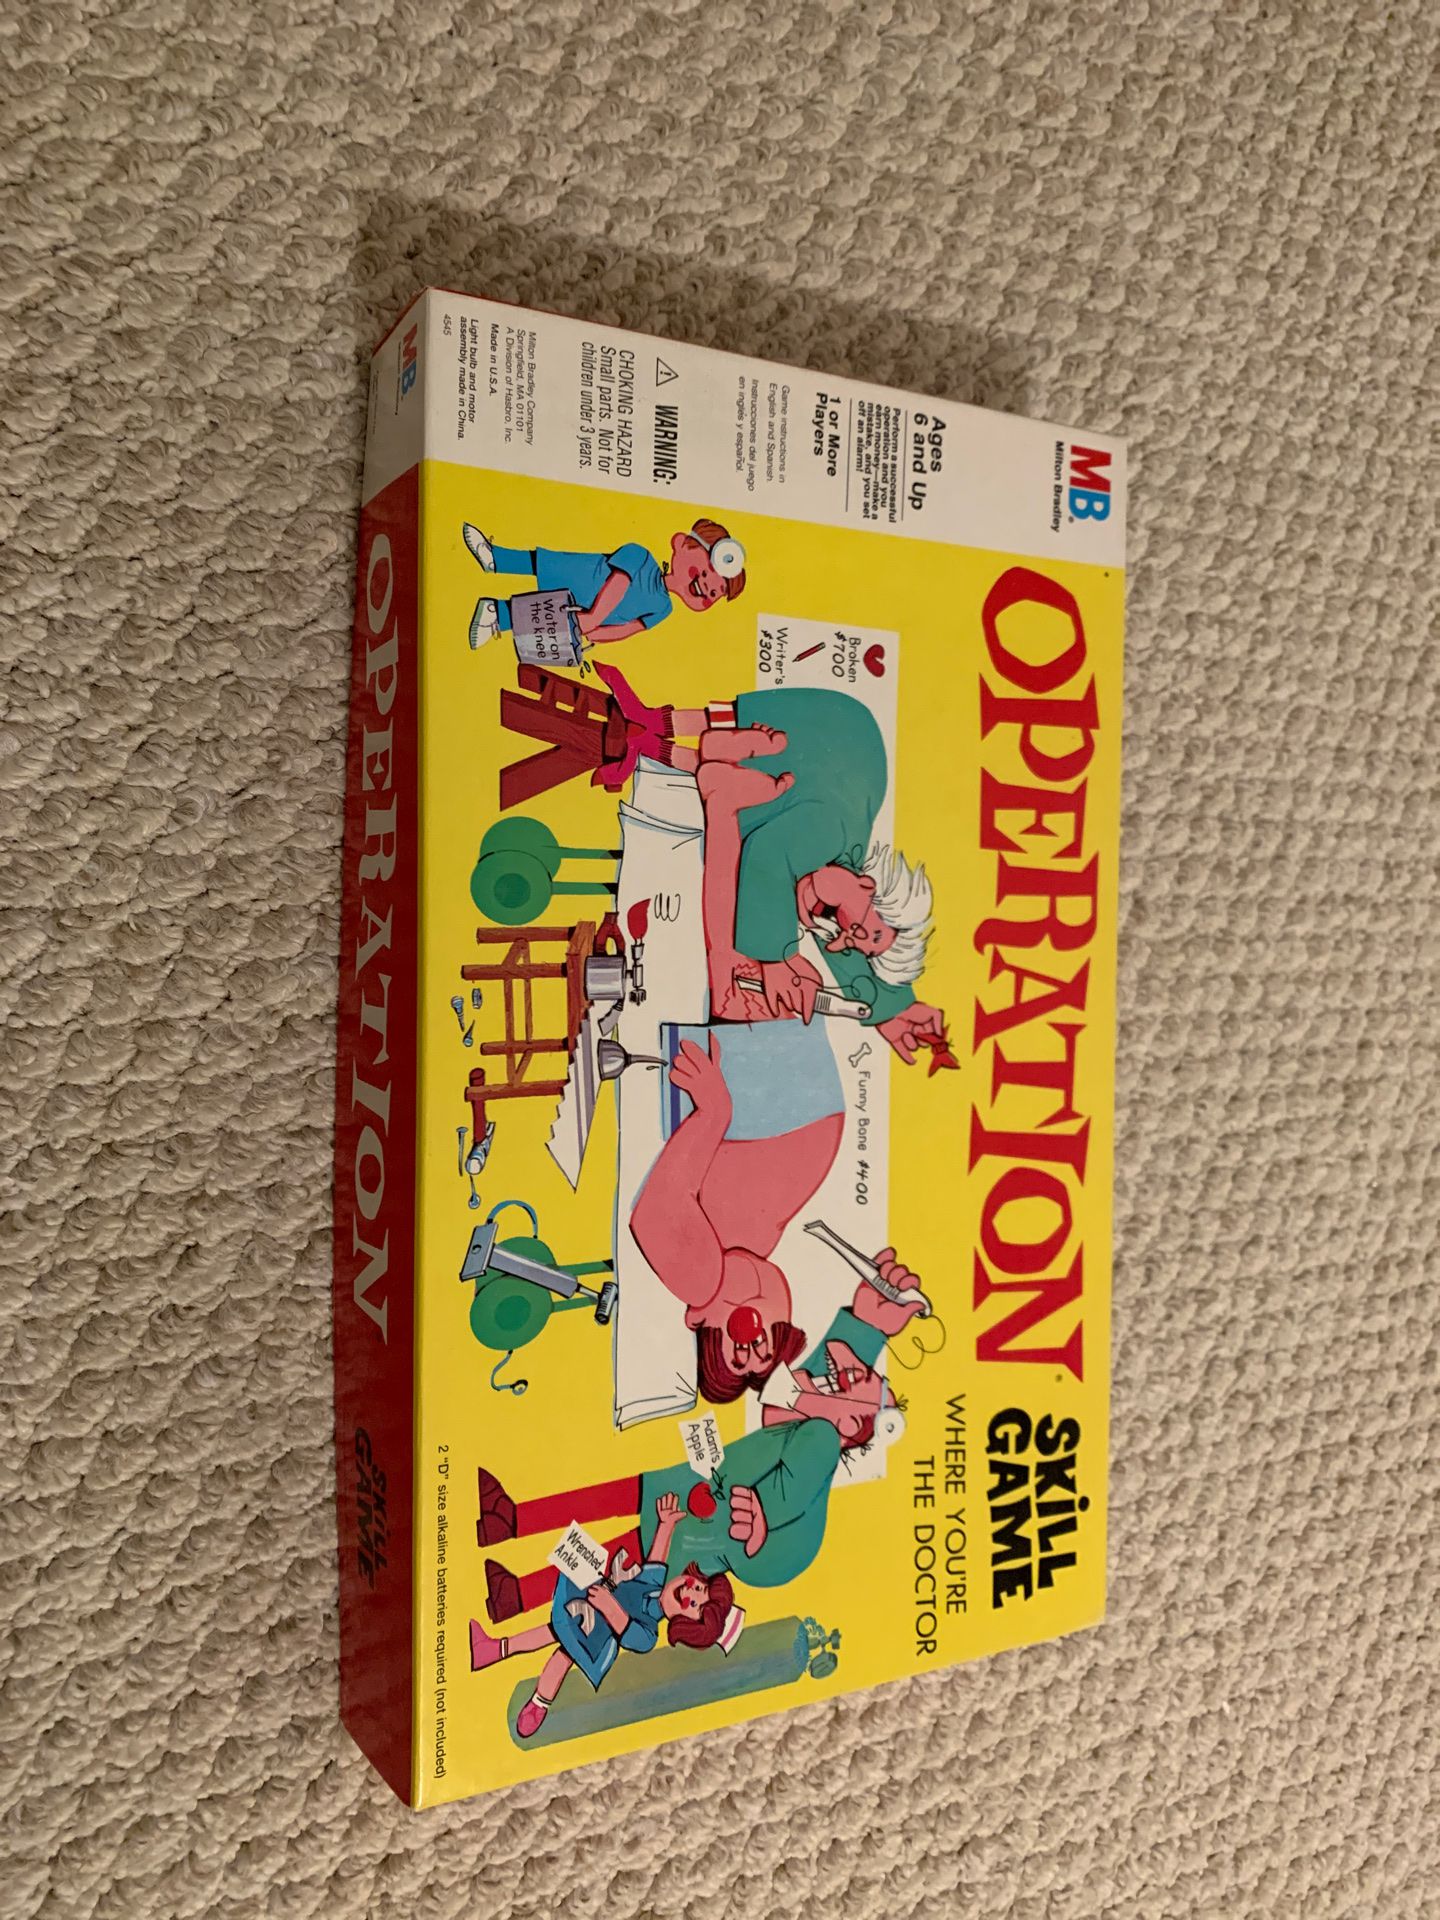 FREE! Operation board game